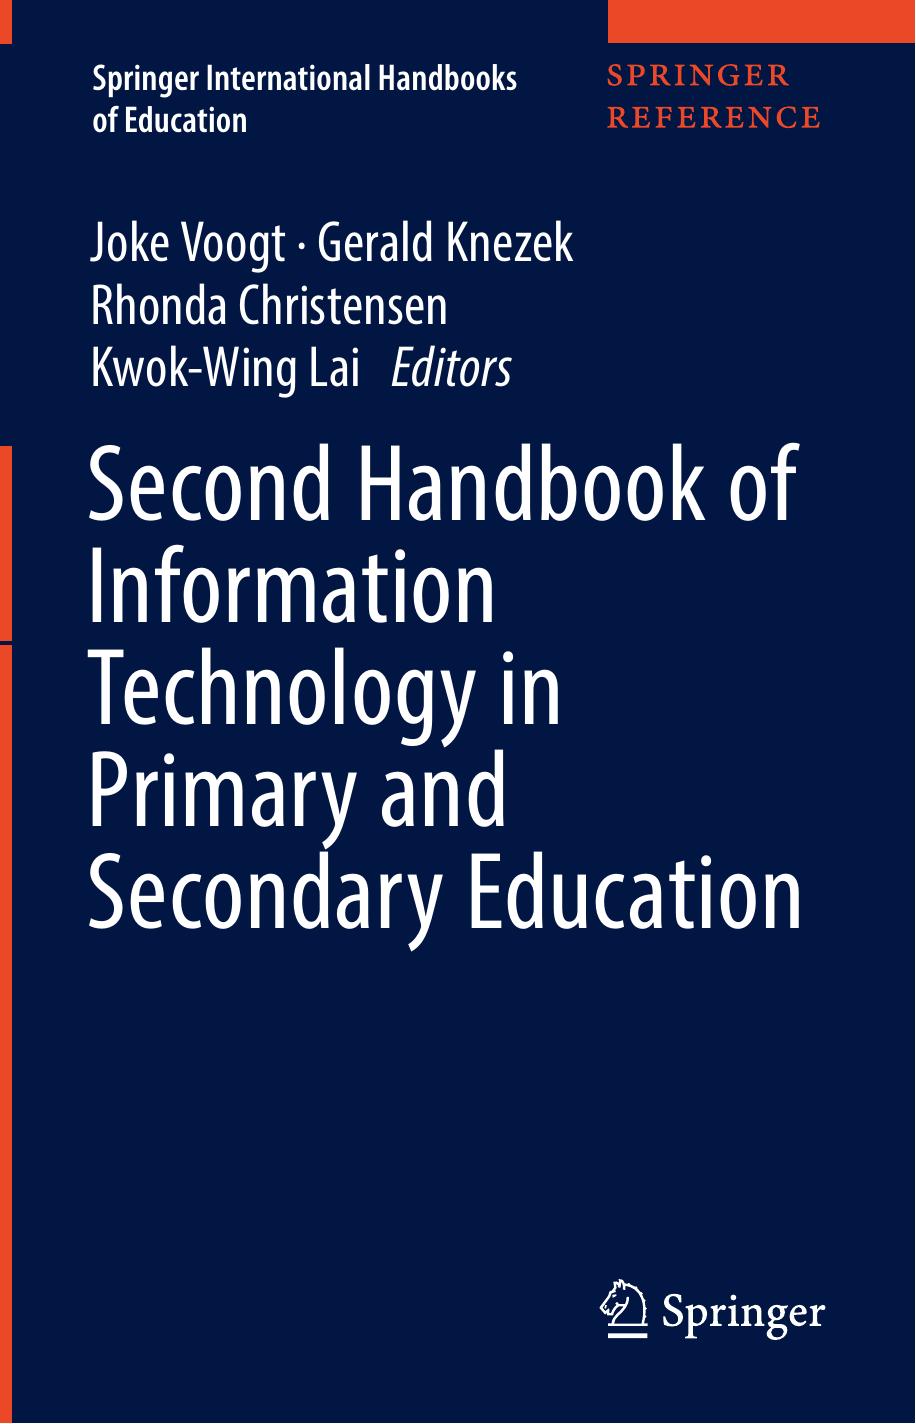 Second Handbook of Information Technology in Primary and Secondary Education 2018.pdf